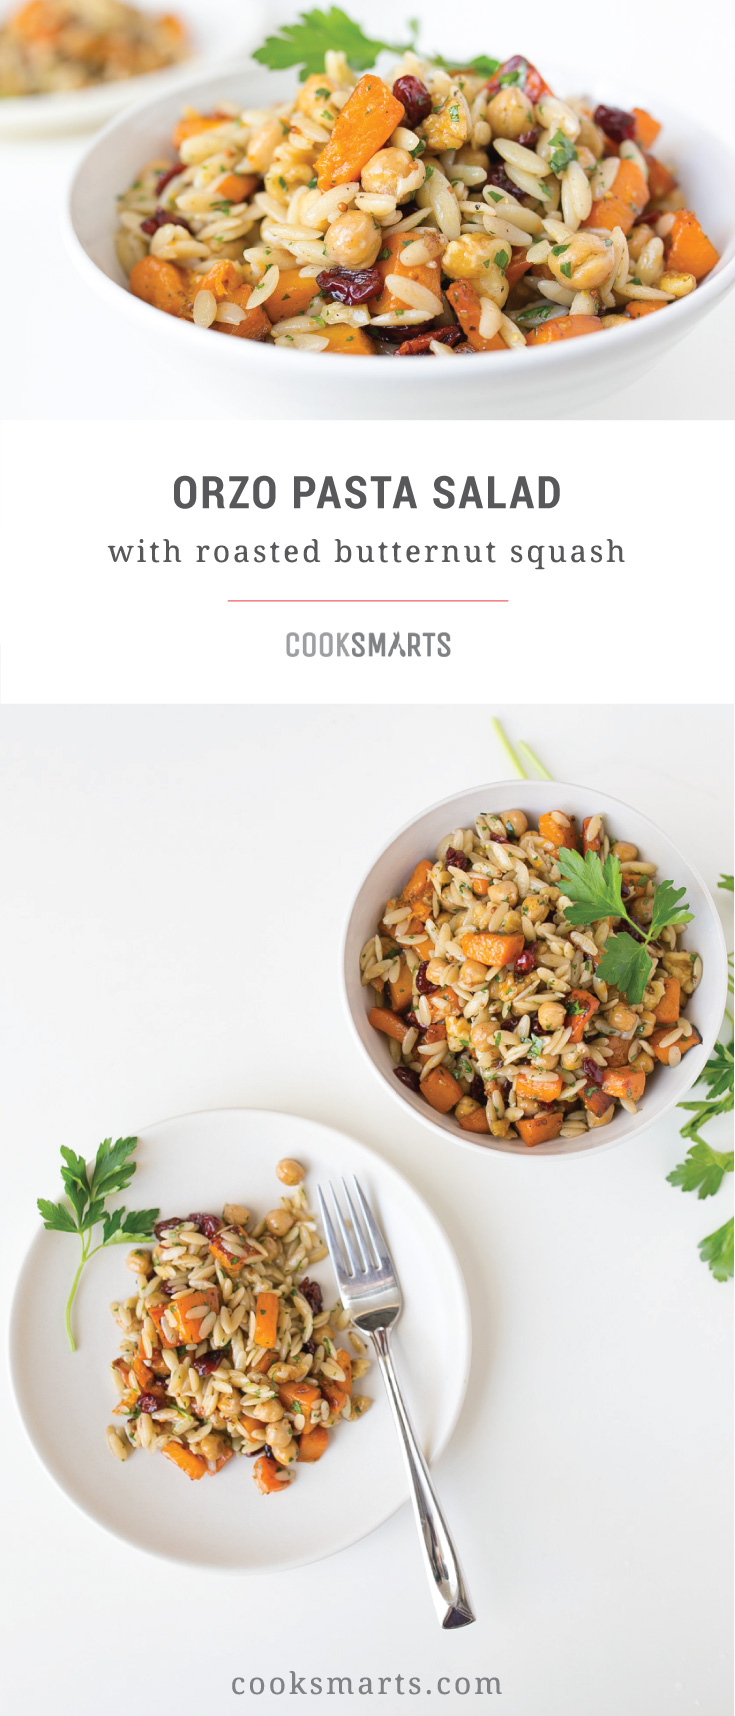 Cook Smarts Recipe: Orzo Pasta Salad with Roasted Butternut Squash